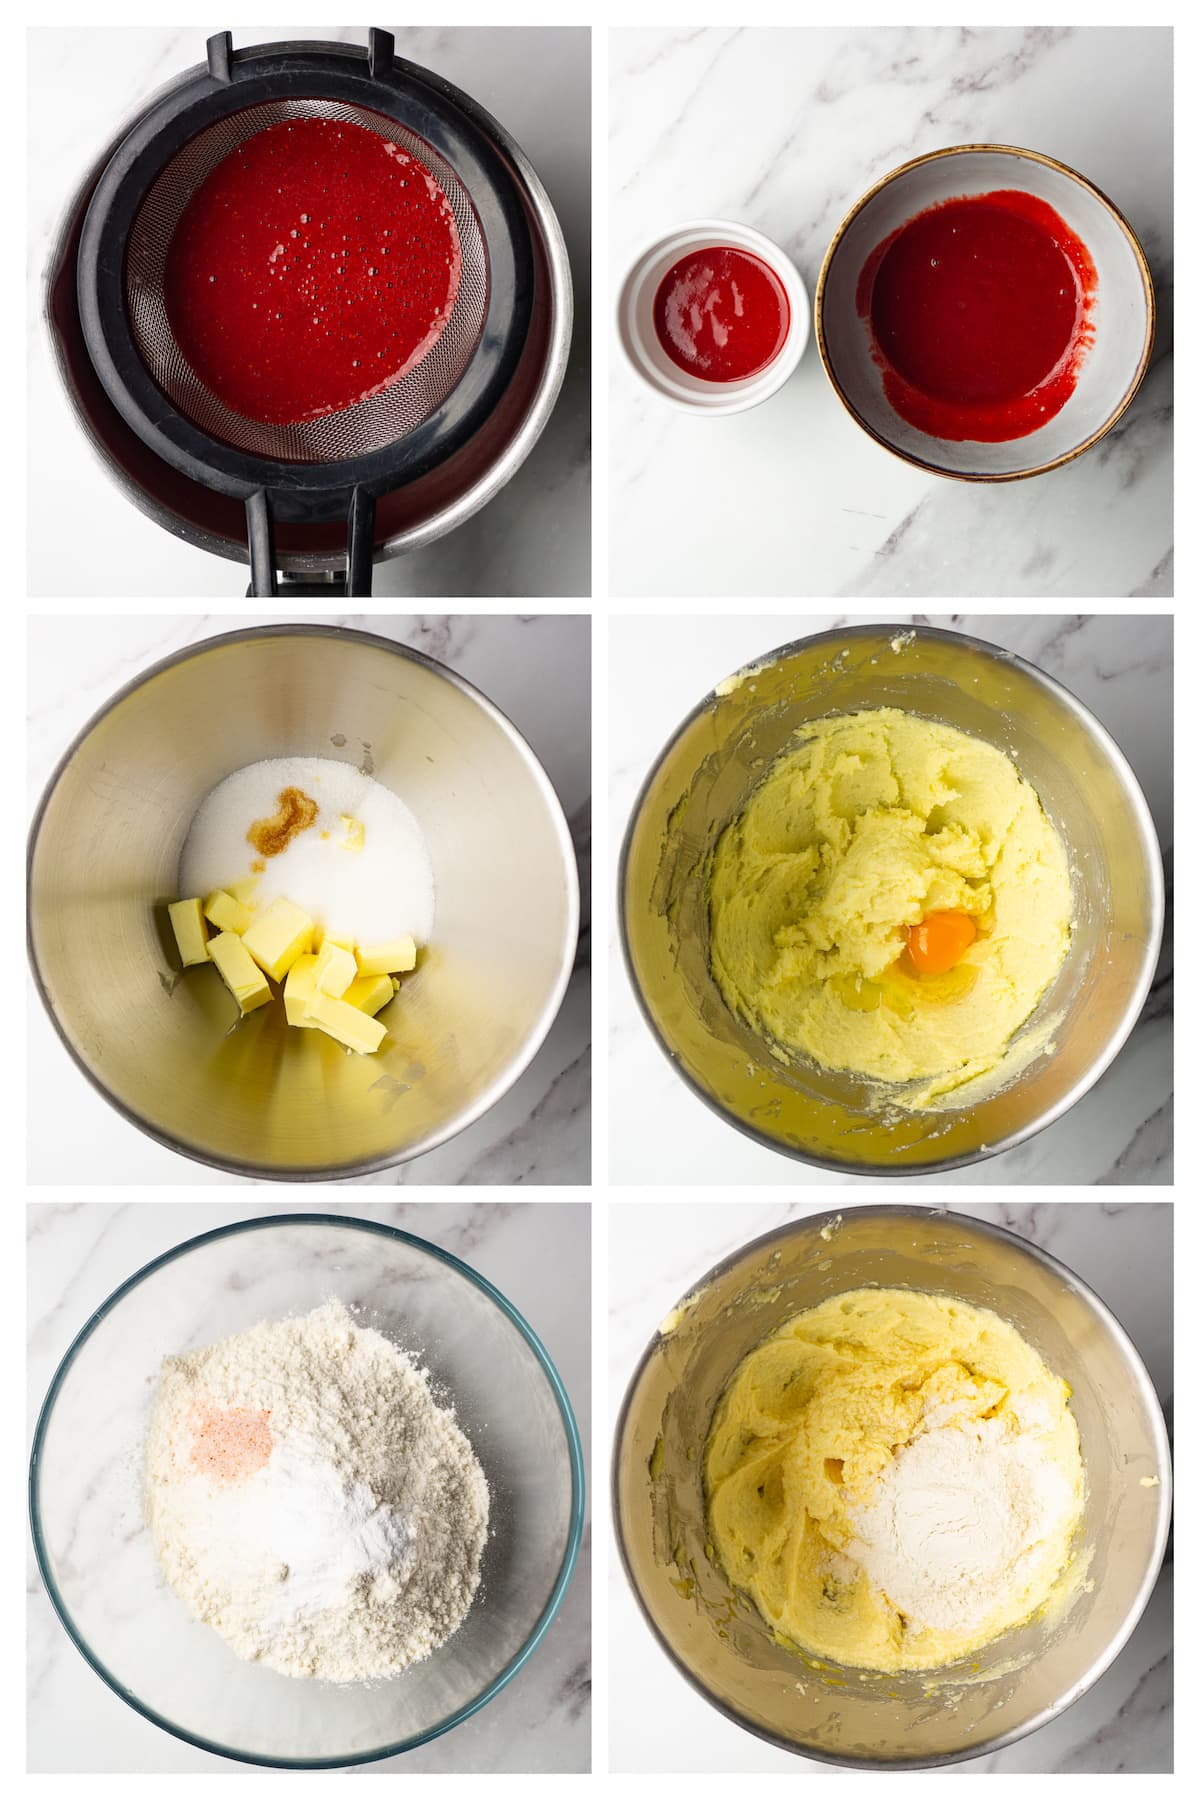 Collage image showing six steps to make strawberry pound cake.